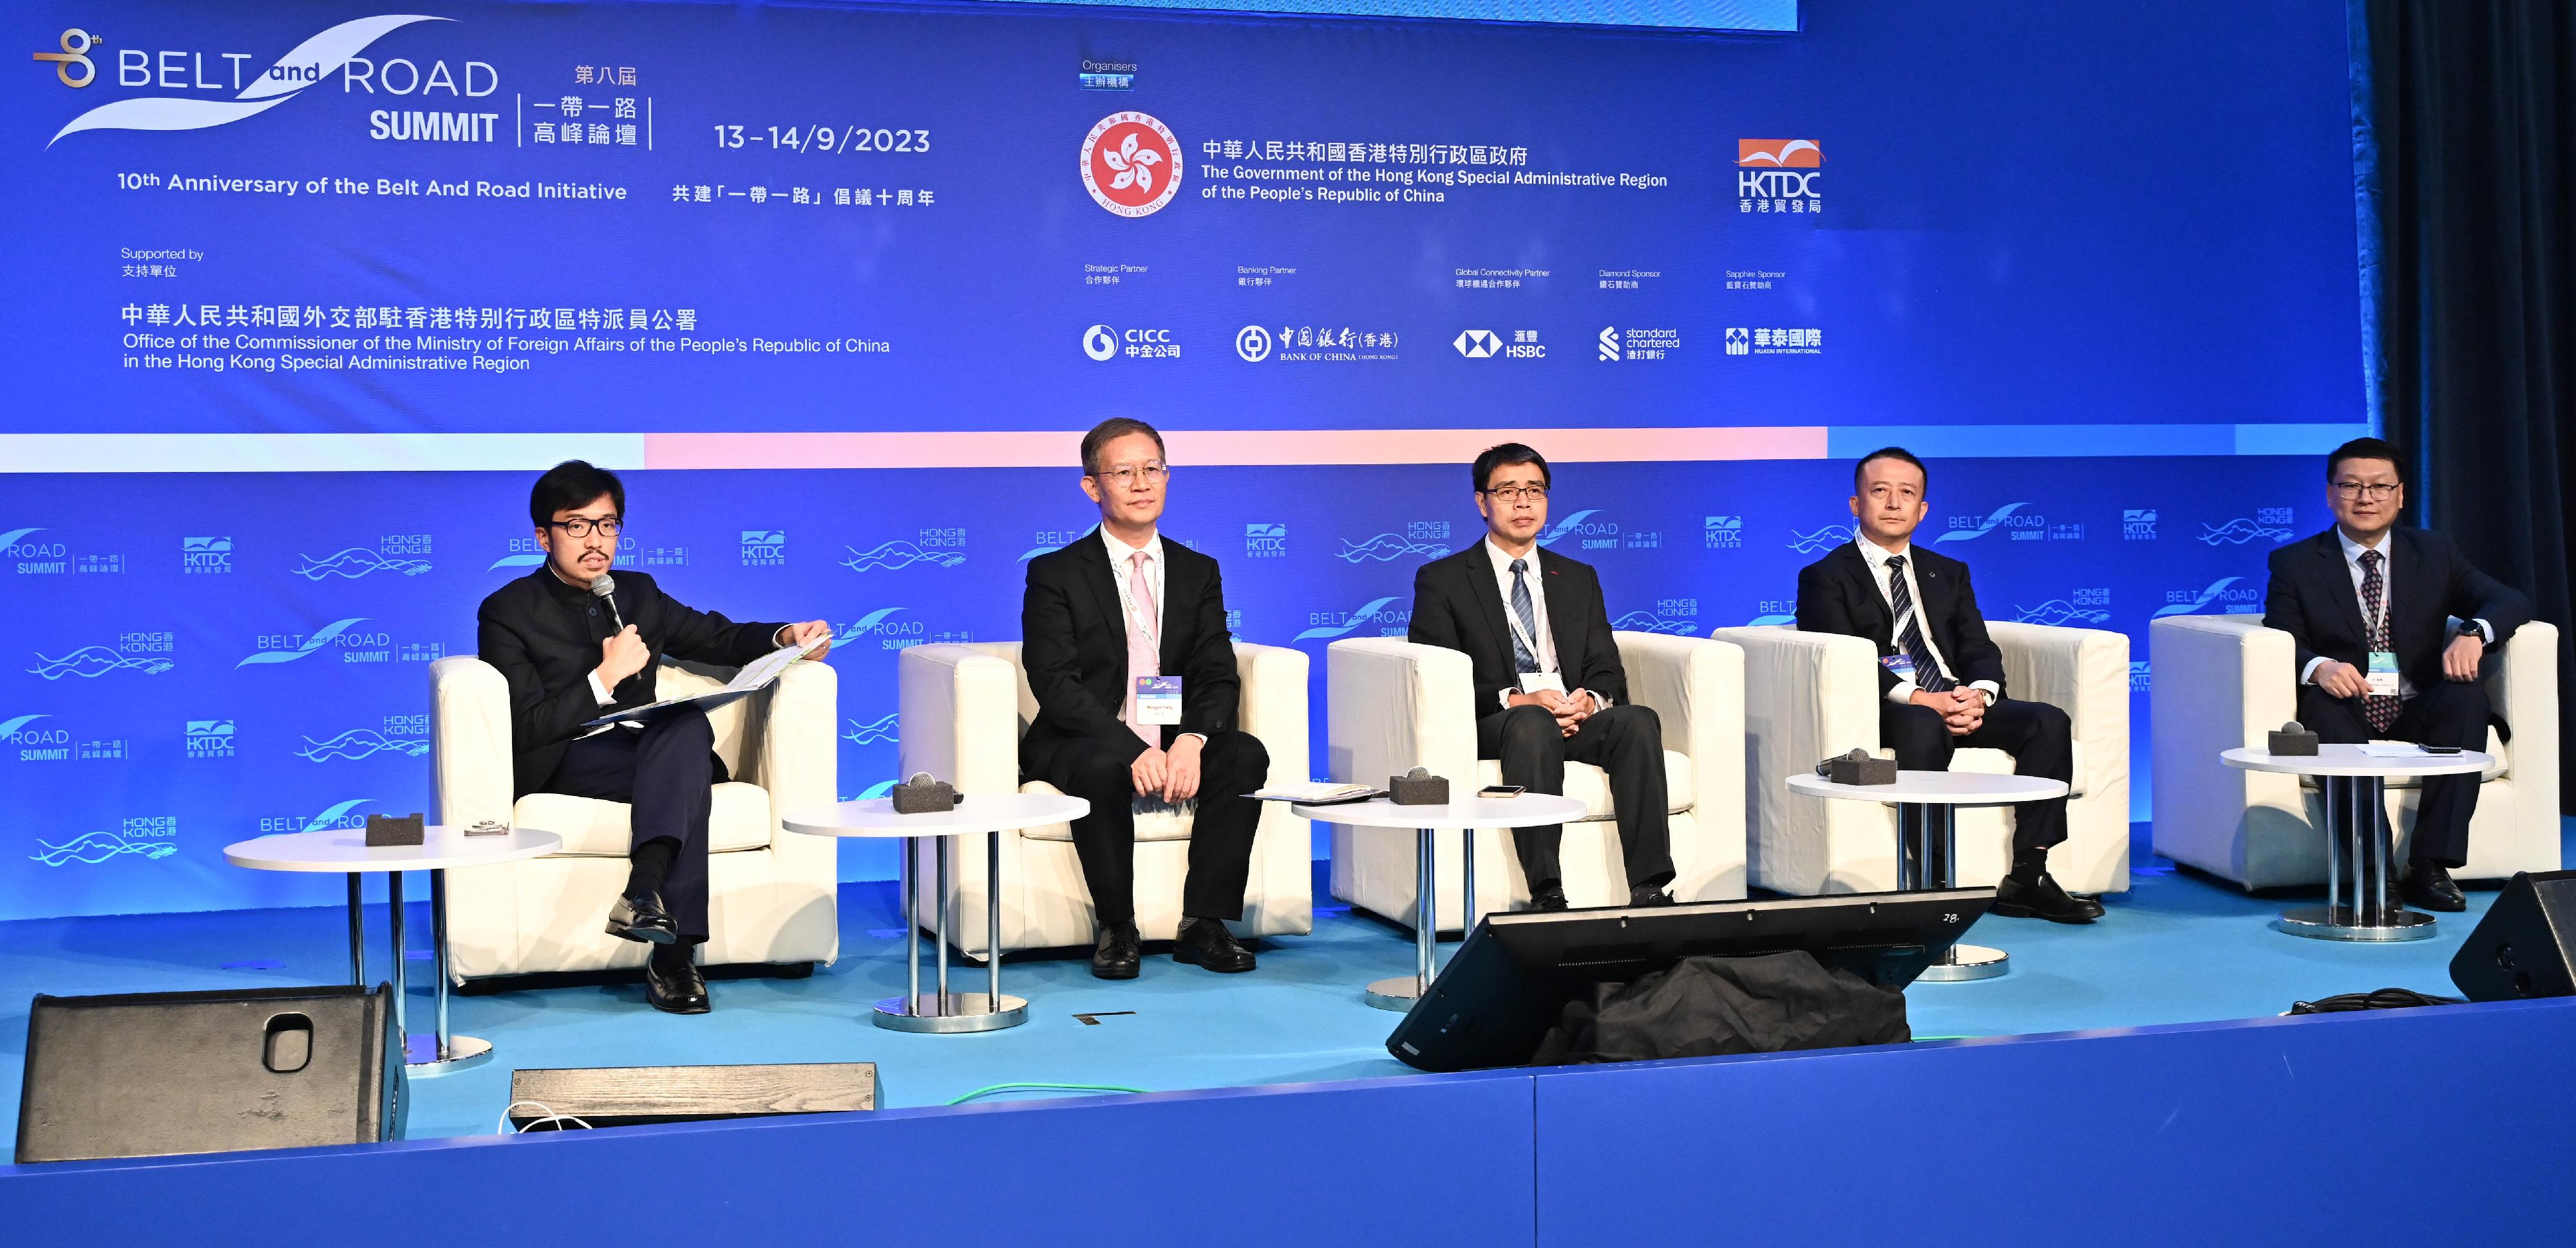 The eighth Belt and Road Summit opened today (September 13). Photo shows the Commissioner for Belt and Road, Mr Nicholas Ho (first left), chairing the thematic breakout session titled "Opportunities in Hong Kong Infrastructure to Boost High-quality Belt and Road Development".
